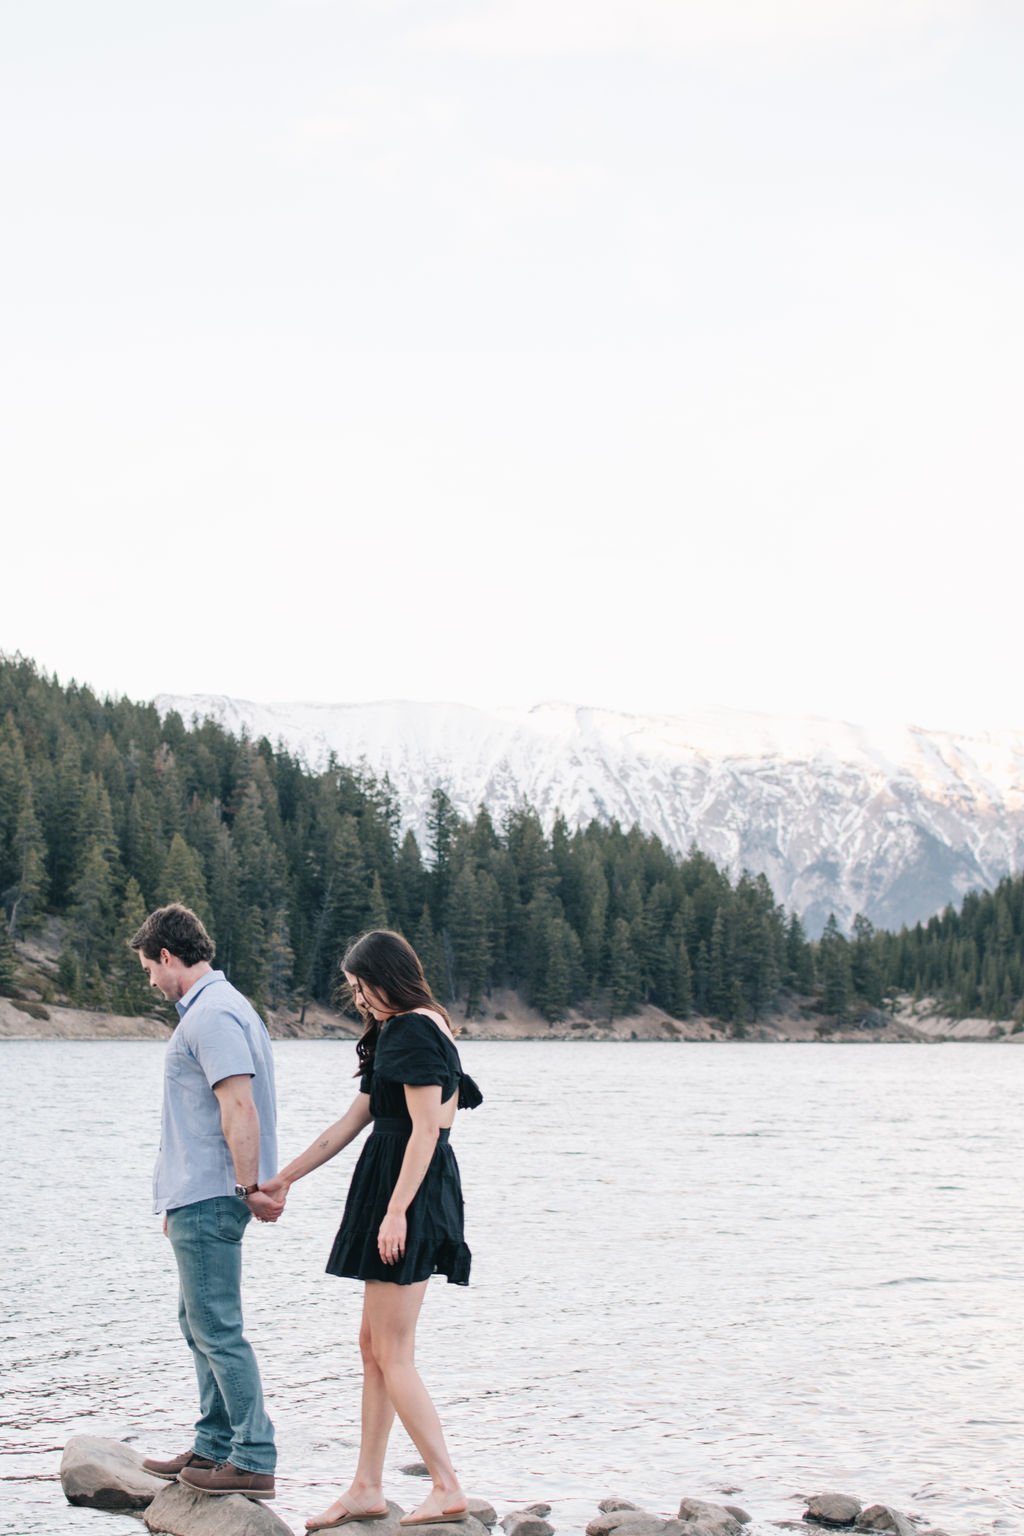 Sunset destination engagement session in Canada's unforgettable Banff National Park photographed by Toronto wedding photographers, Ugo Photography